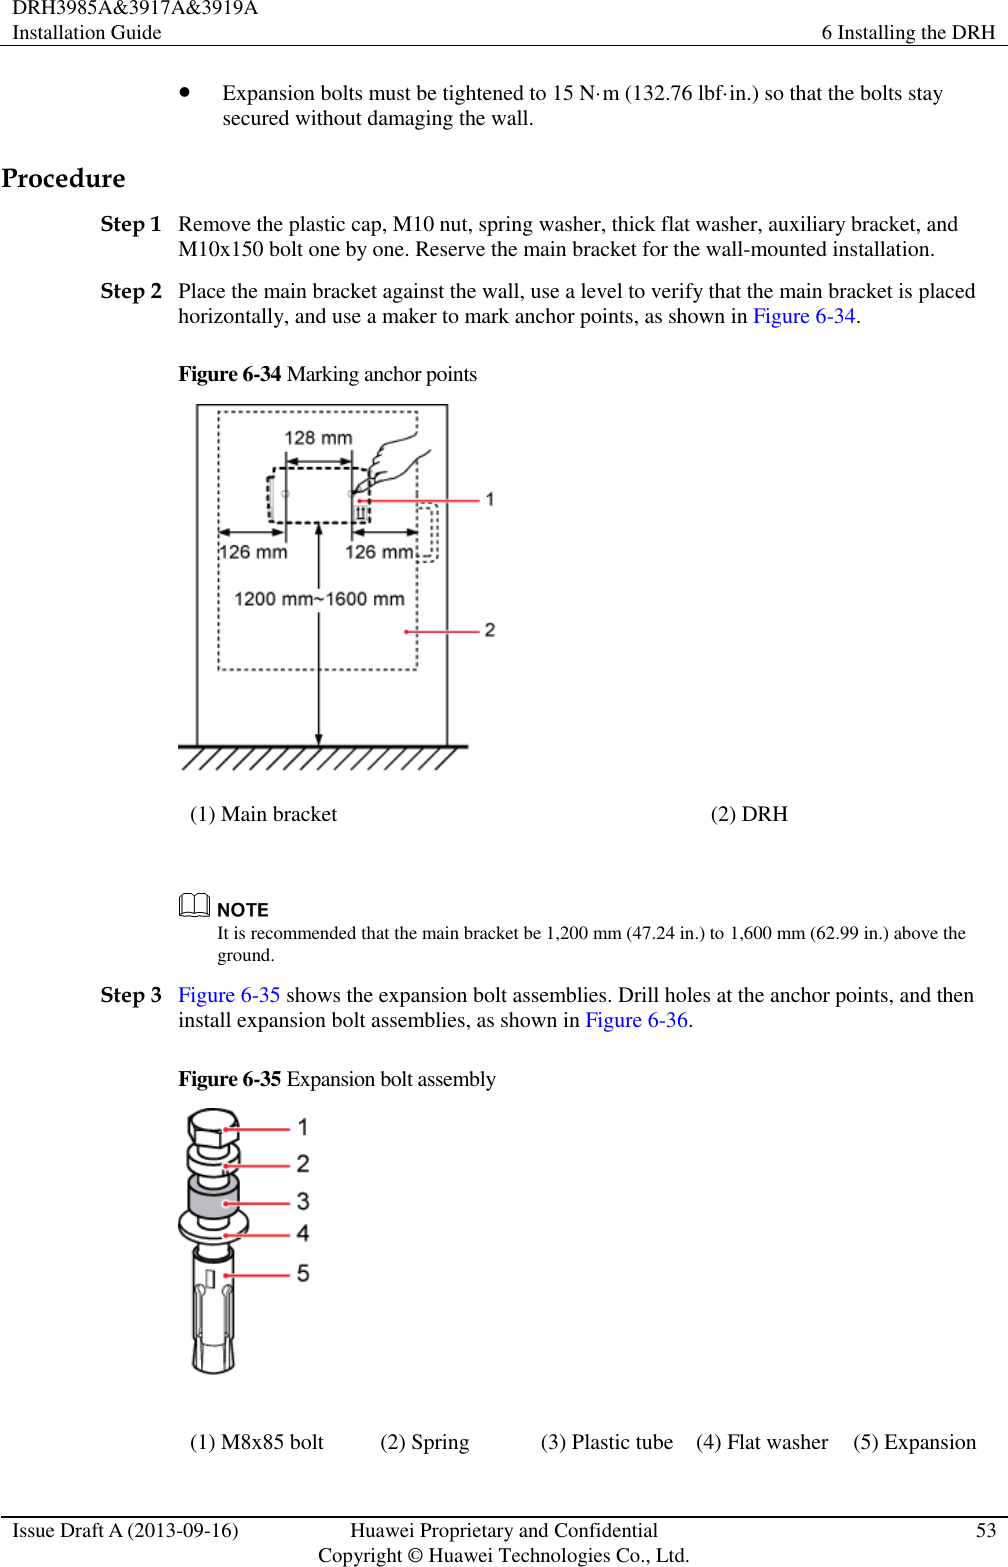 DRH3985A&amp;3917A&amp;3919A Installation Guide 6 Installing the DRH  Issue Draft A (2013-09-16) Huawei Proprietary and Confidential                                     Copyright © Huawei Technologies Co., Ltd. 53   Expansion bolts must be tightened to 15 N·m (132.76 lbf·in.) so that the bolts stay secured without damaging the wall. Procedure Step 1 Remove the plastic cap, M10 nut, spring washer, thick flat washer, auxiliary bracket, and M10x150 bolt one by one. Reserve the main bracket for the wall-mounted installation. Step 2 Place the main bracket against the wall, use a level to verify that the main bracket is placed horizontally, and use a maker to mark anchor points, as shown in Figure 6-34. Figure 6-34 Marking anchor points  (1) Main bracket (2) DRH   It is recommended that the main bracket be 1,200 mm (47.24 in.) to 1,600 mm (62.99 in.) above the ground. Step 3 Figure 6-35 shows the expansion bolt assemblies. Drill holes at the anchor points, and then install expansion bolt assemblies, as shown in Figure 6-36. Figure 6-35 Expansion bolt assembly  (1) M8x85 bolt (2) Spring (3) Plastic tube (4) Flat washer (5) Expansion 